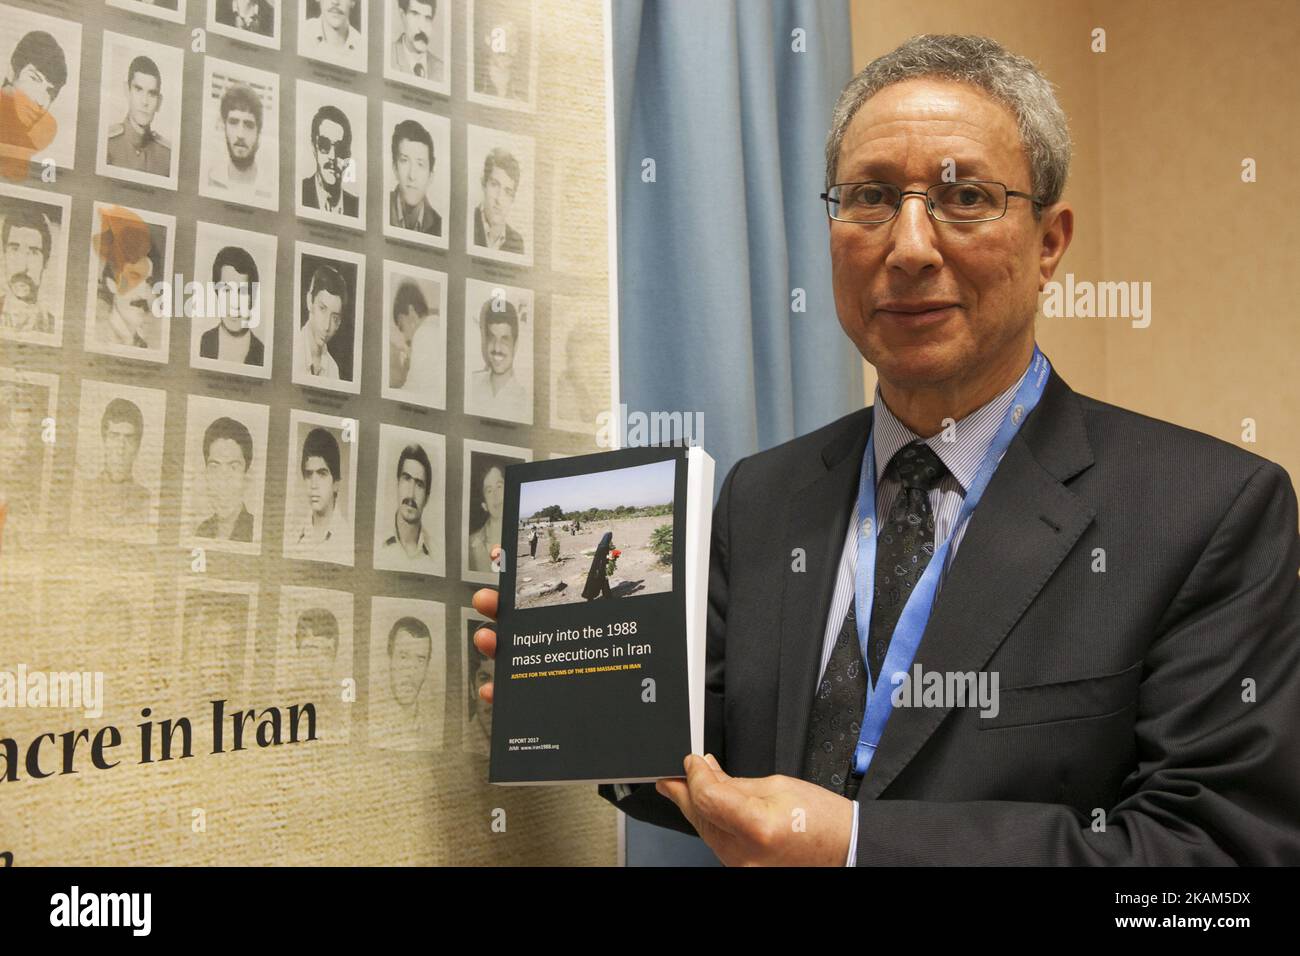 Tahar Boumedra, theÂ former chief of the Human Rights Office of the UN Assistance Mission for Iraq (UNAMI), poses after press conference by the International Committee 'Justice for Victims of 1988 Massacre in Iran' (JVMI) at the UN Headquarters in Geneva on Wednesday, March 15, 2017 to announce its first report on the massacre of 30,000 political prisoners mainly supporters of the Peopleâ€™s Mojahedin Organization of Iran (PMOI/MEK) in Iran in 1988. (Photo by Siavosh Hosseini/NurPhoto) *** Please Use Credit from Credit Field *** Stock Photo